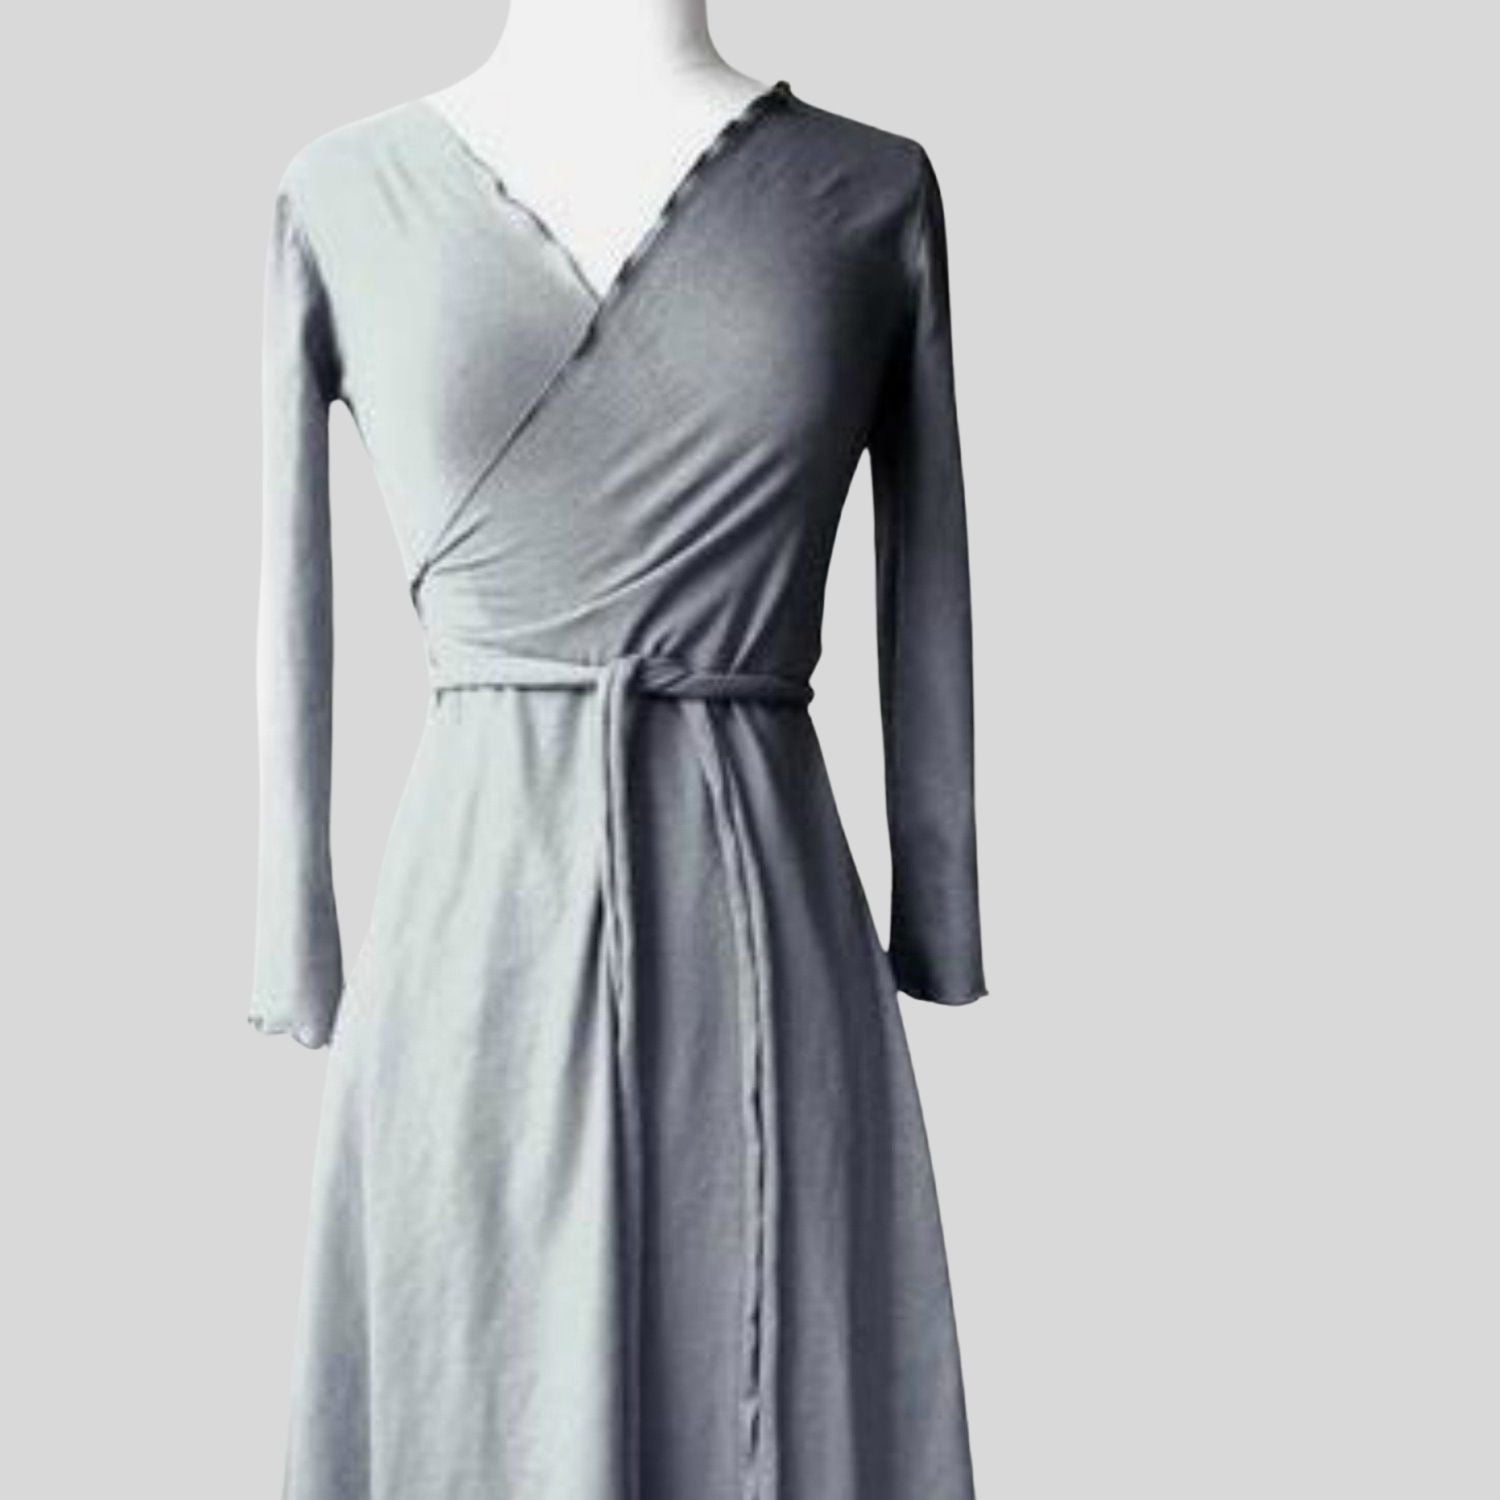 Canada Women's wrap dress with long sleeves | Shop made in Canada women's dresses | Buy maxi dresses from Canada